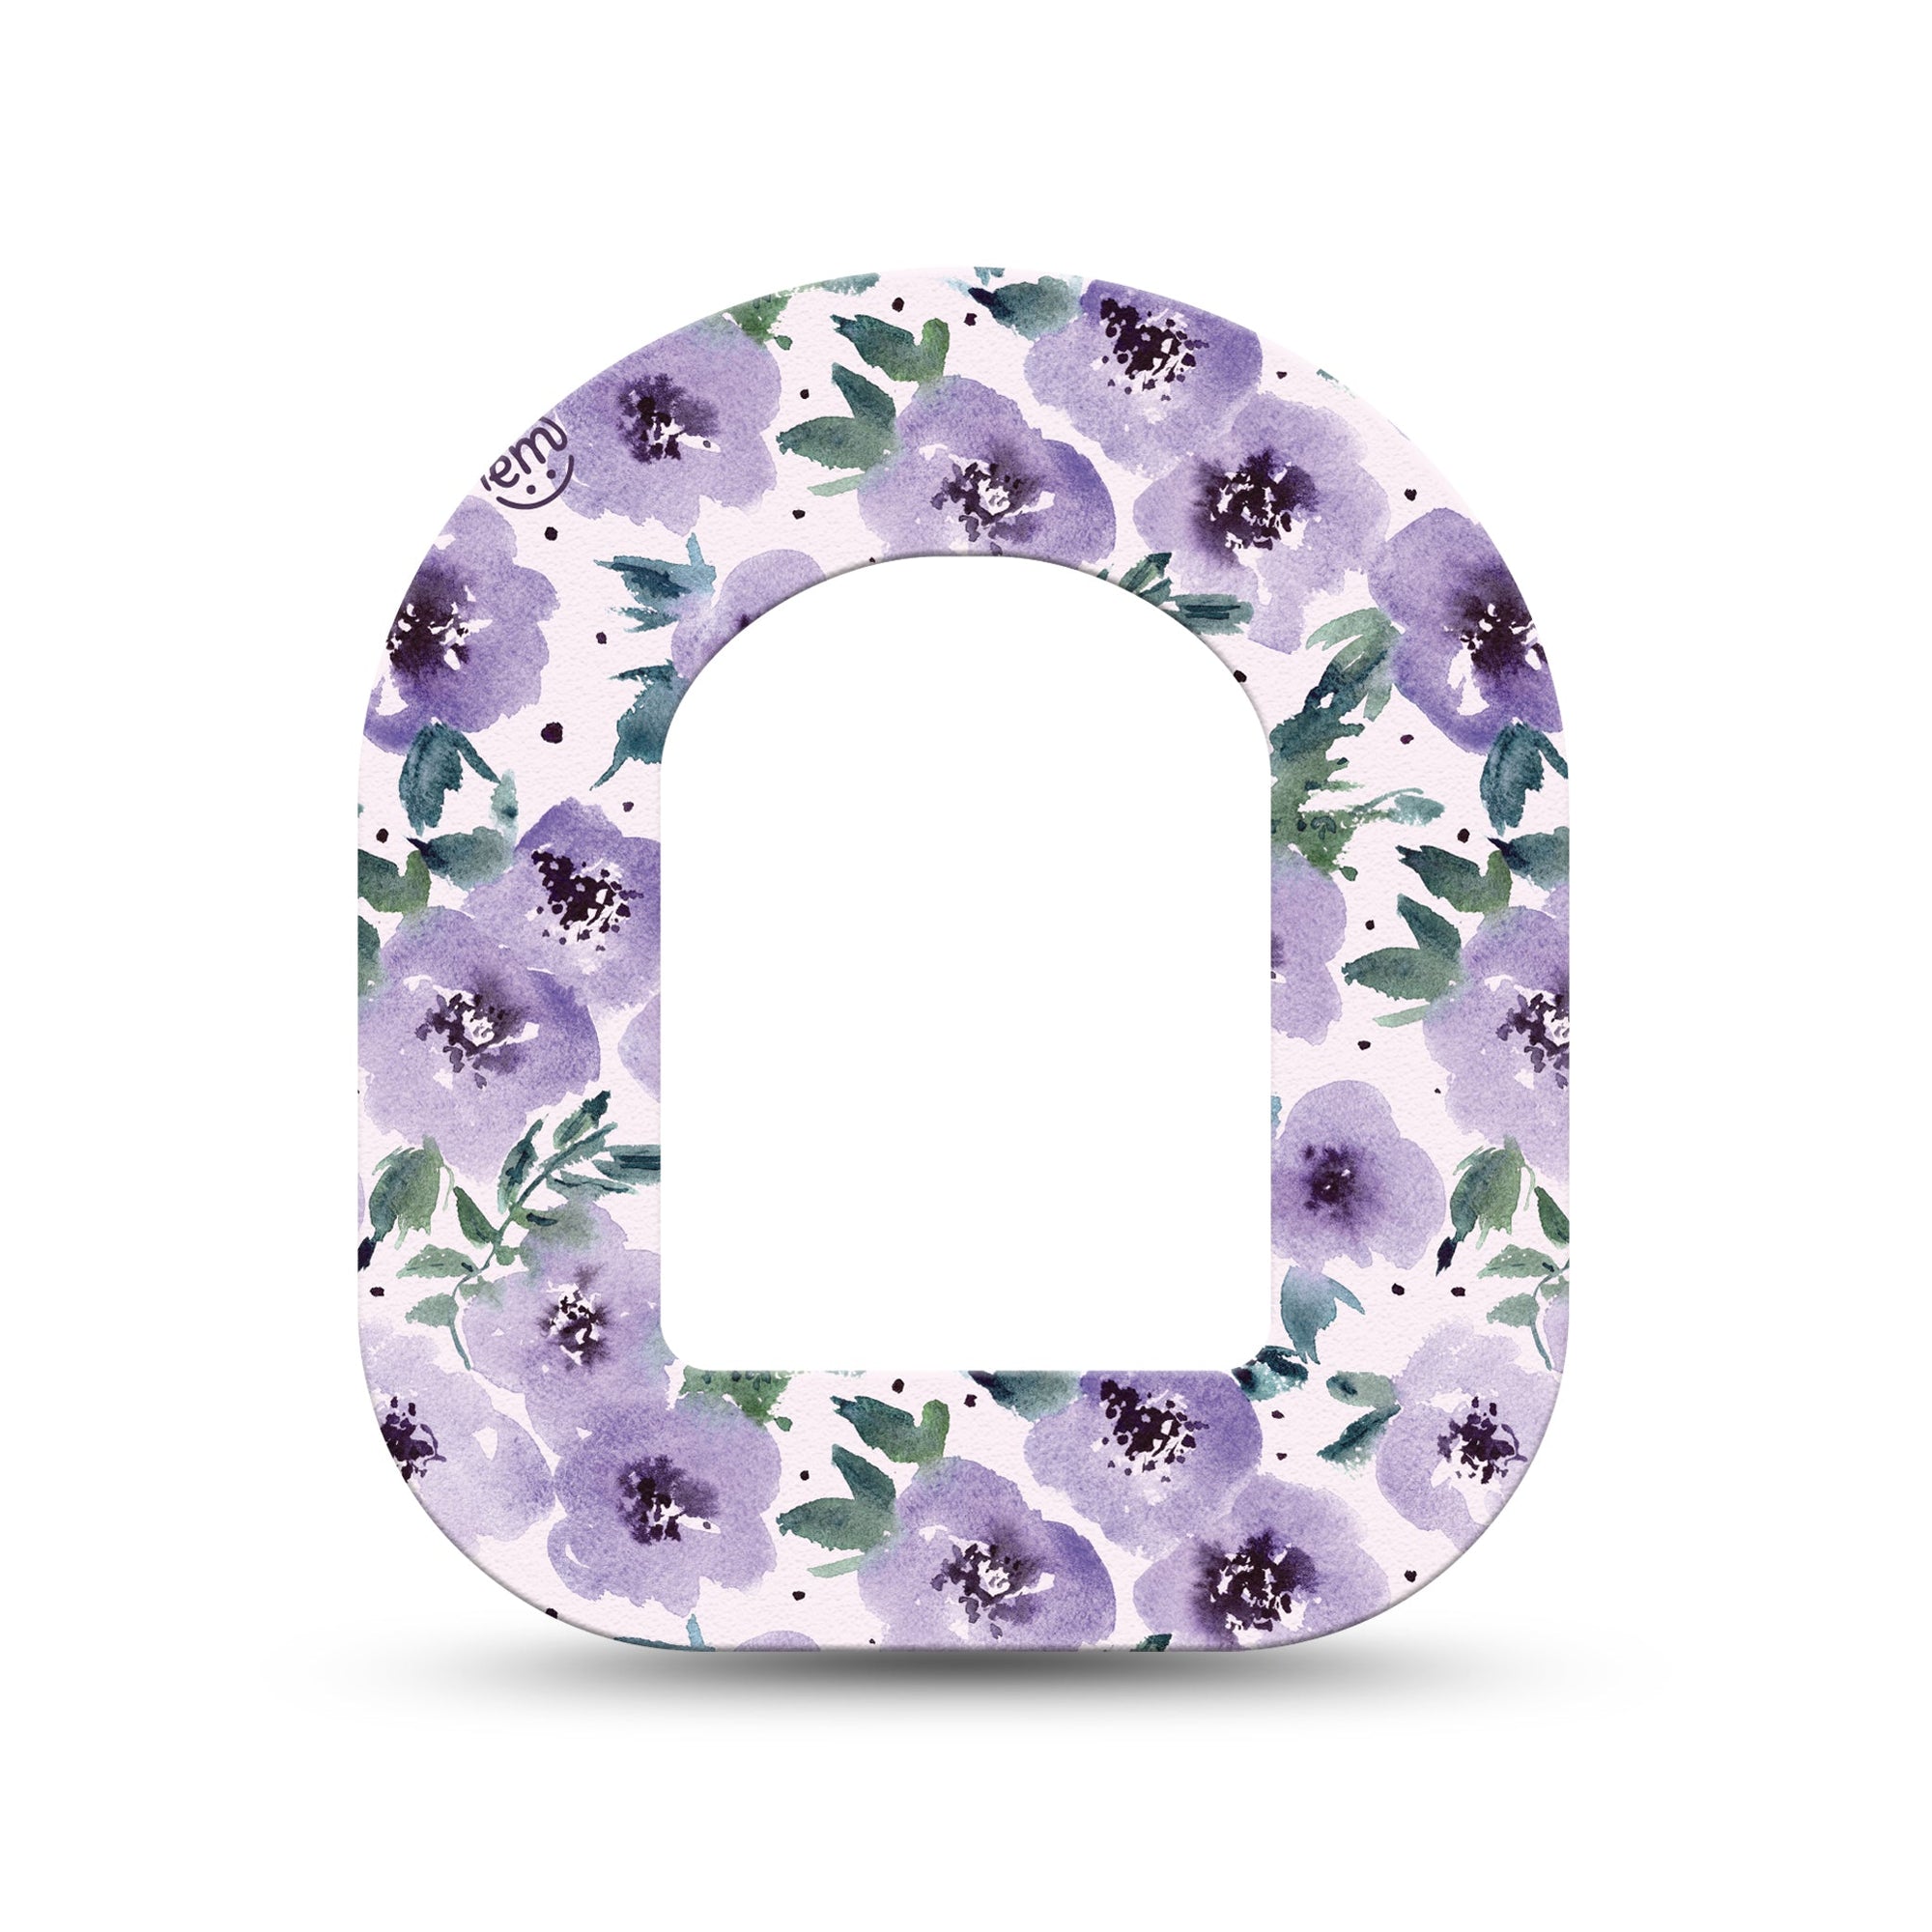 ExpressionMed Flowering Amethyst Pod Mini Tape Single, Blooming Gem Fixing Ring Tape Pump Design